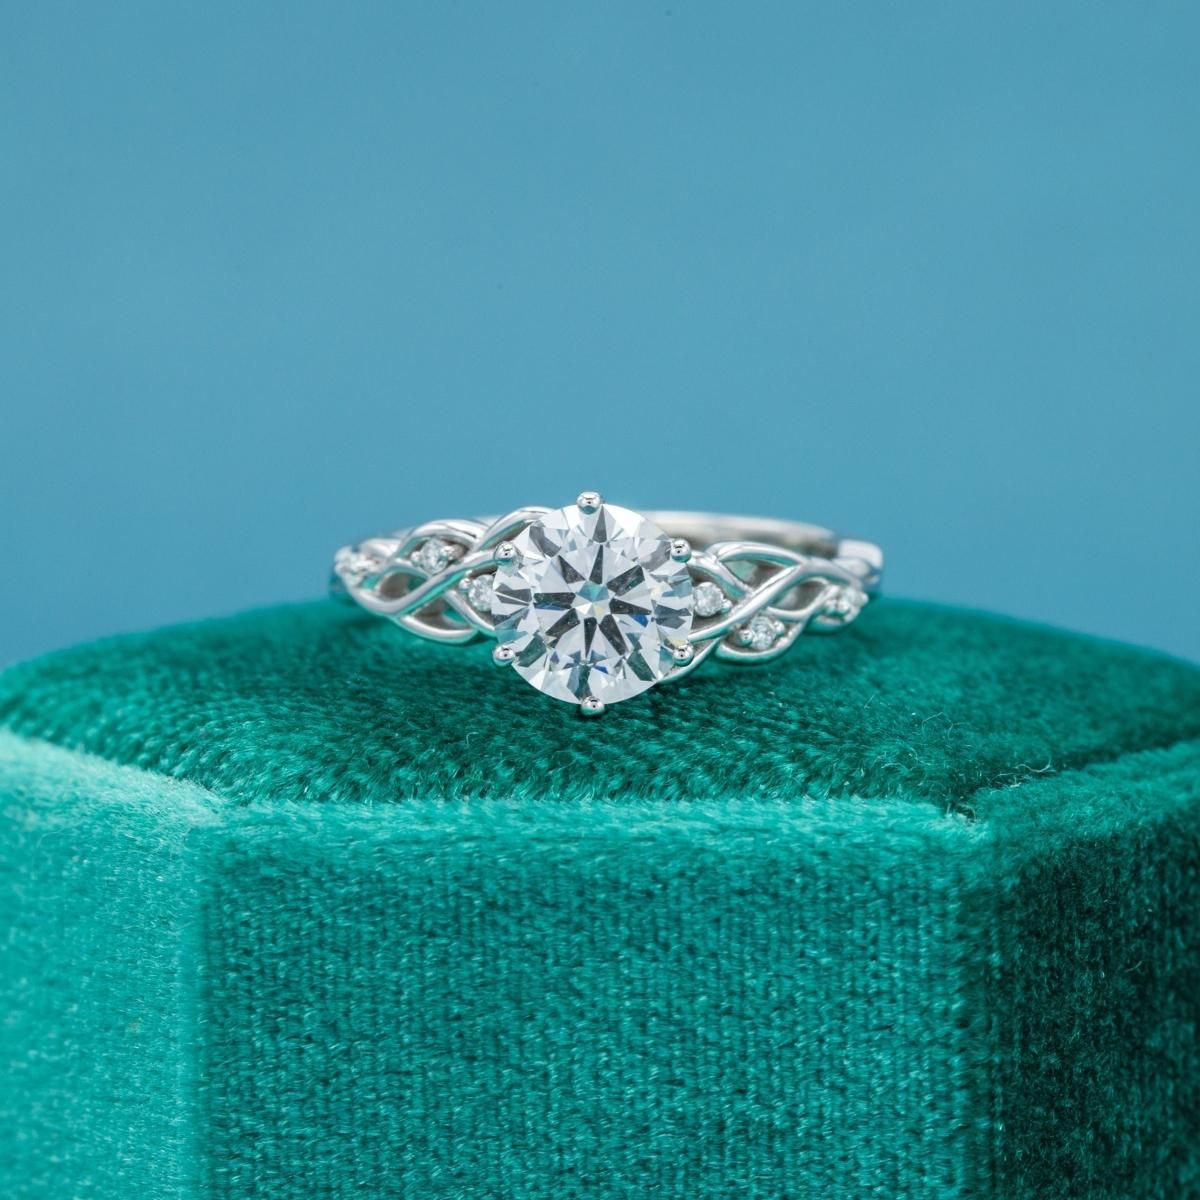 Is lab diamond a good choice for an engagement ring? | CustomMade.com